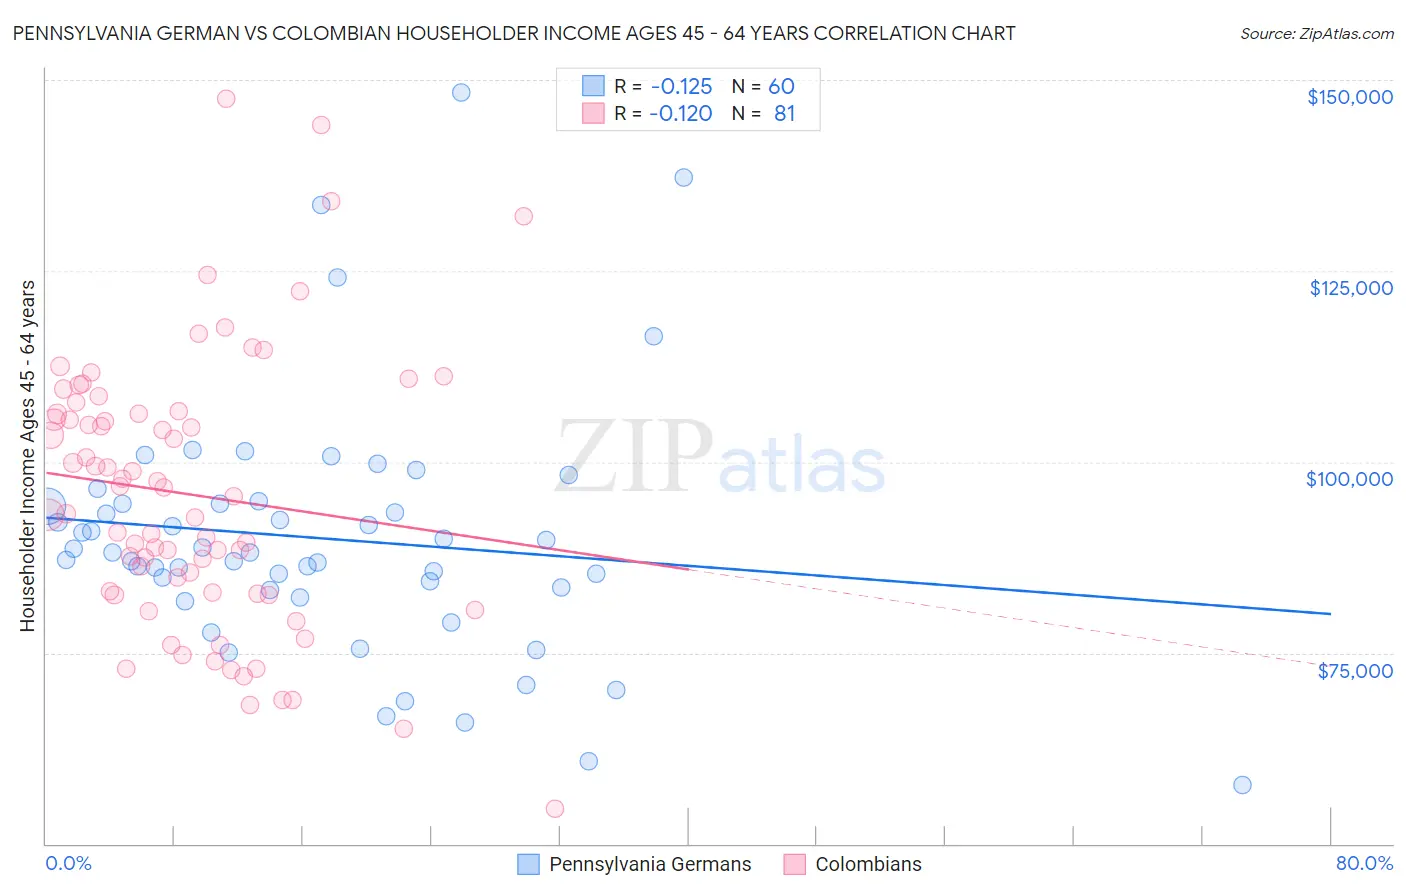 Pennsylvania German vs Colombian Householder Income Ages 45 - 64 years